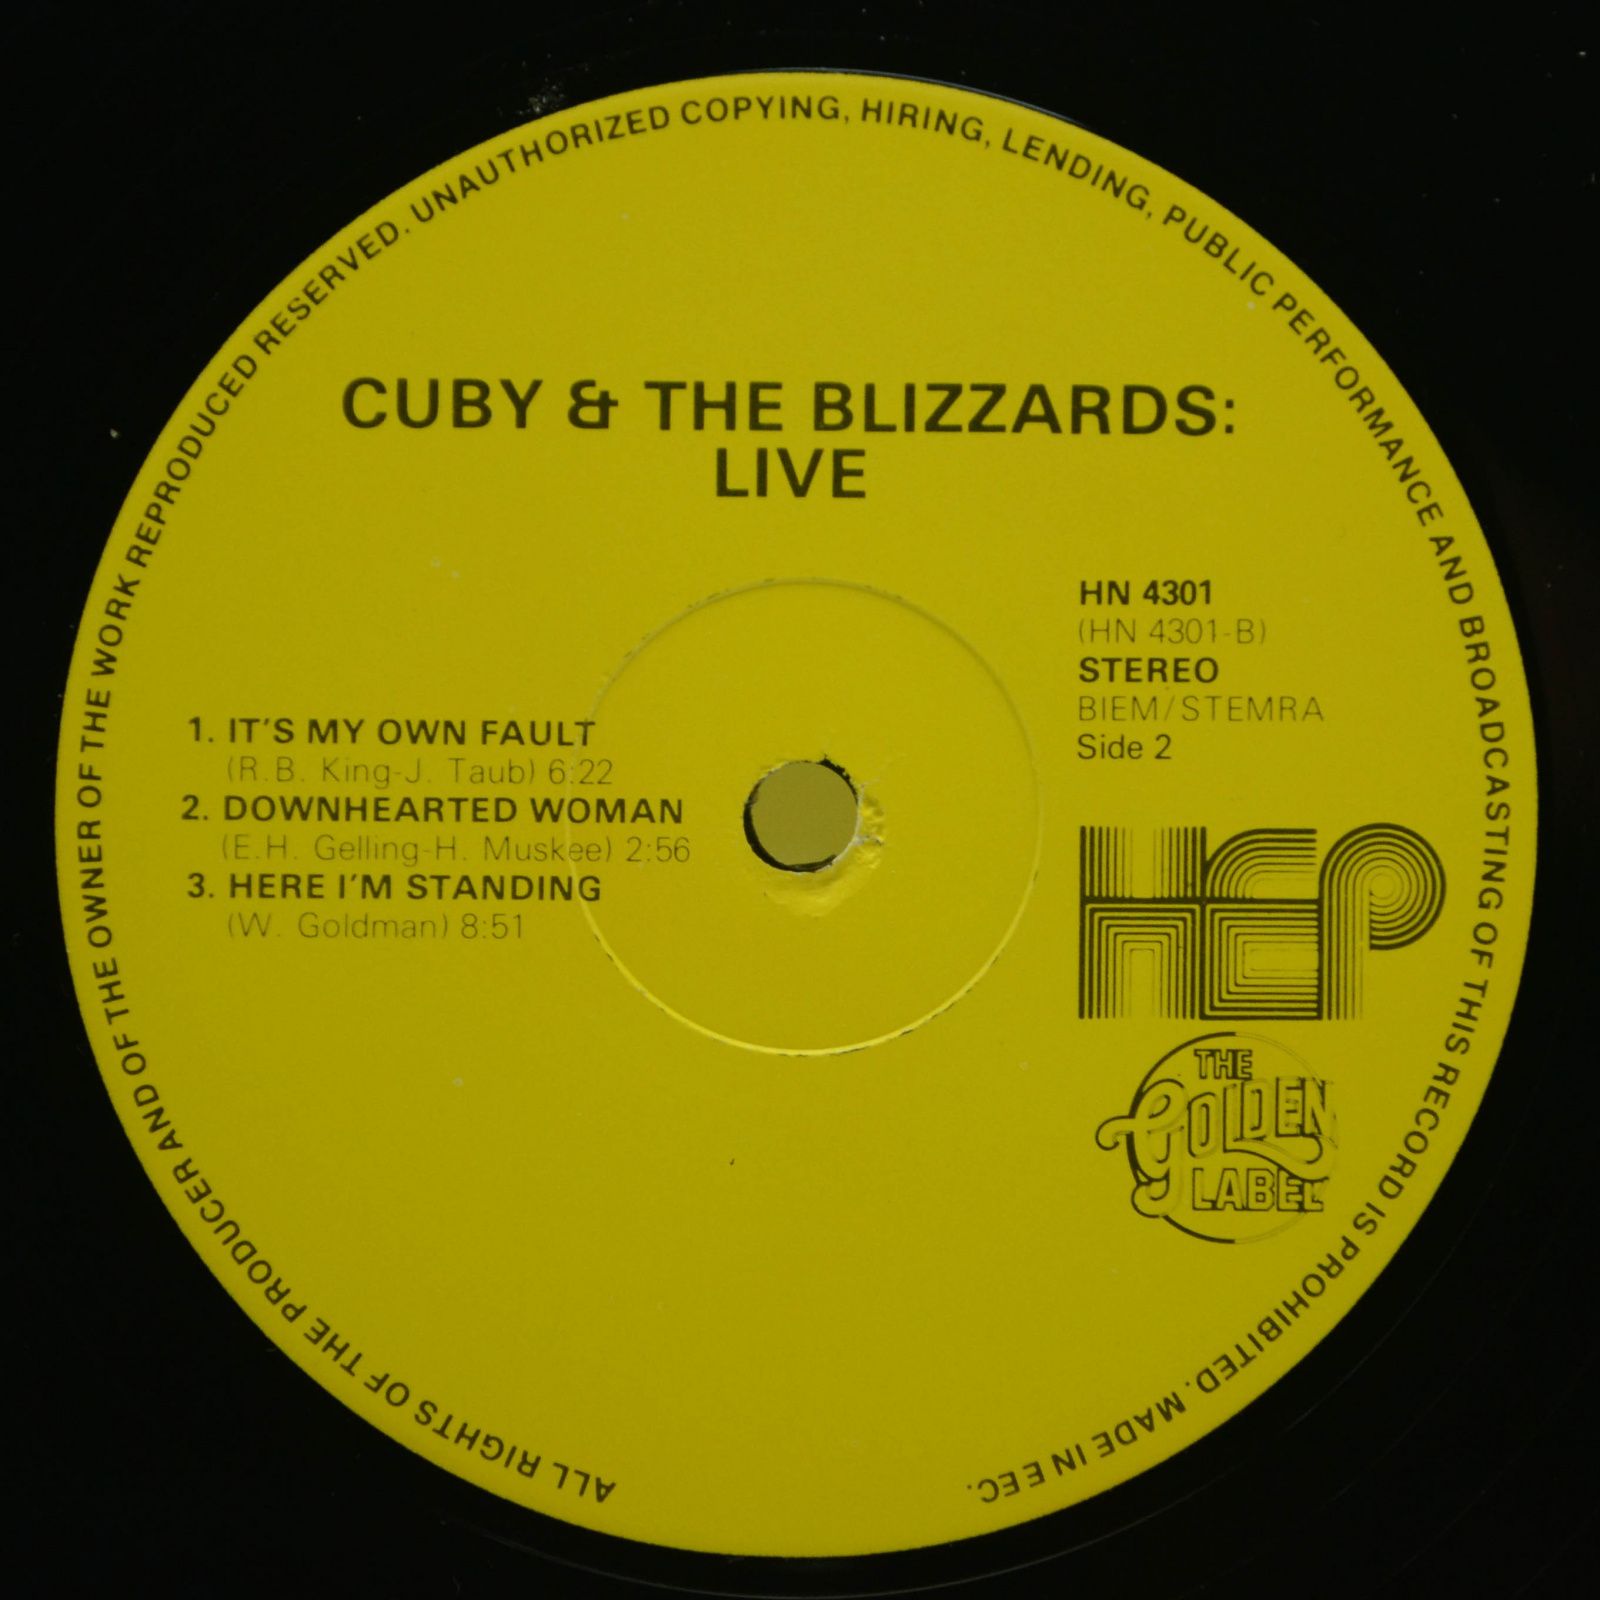 Cuby & The Blizzards — Live, 1977